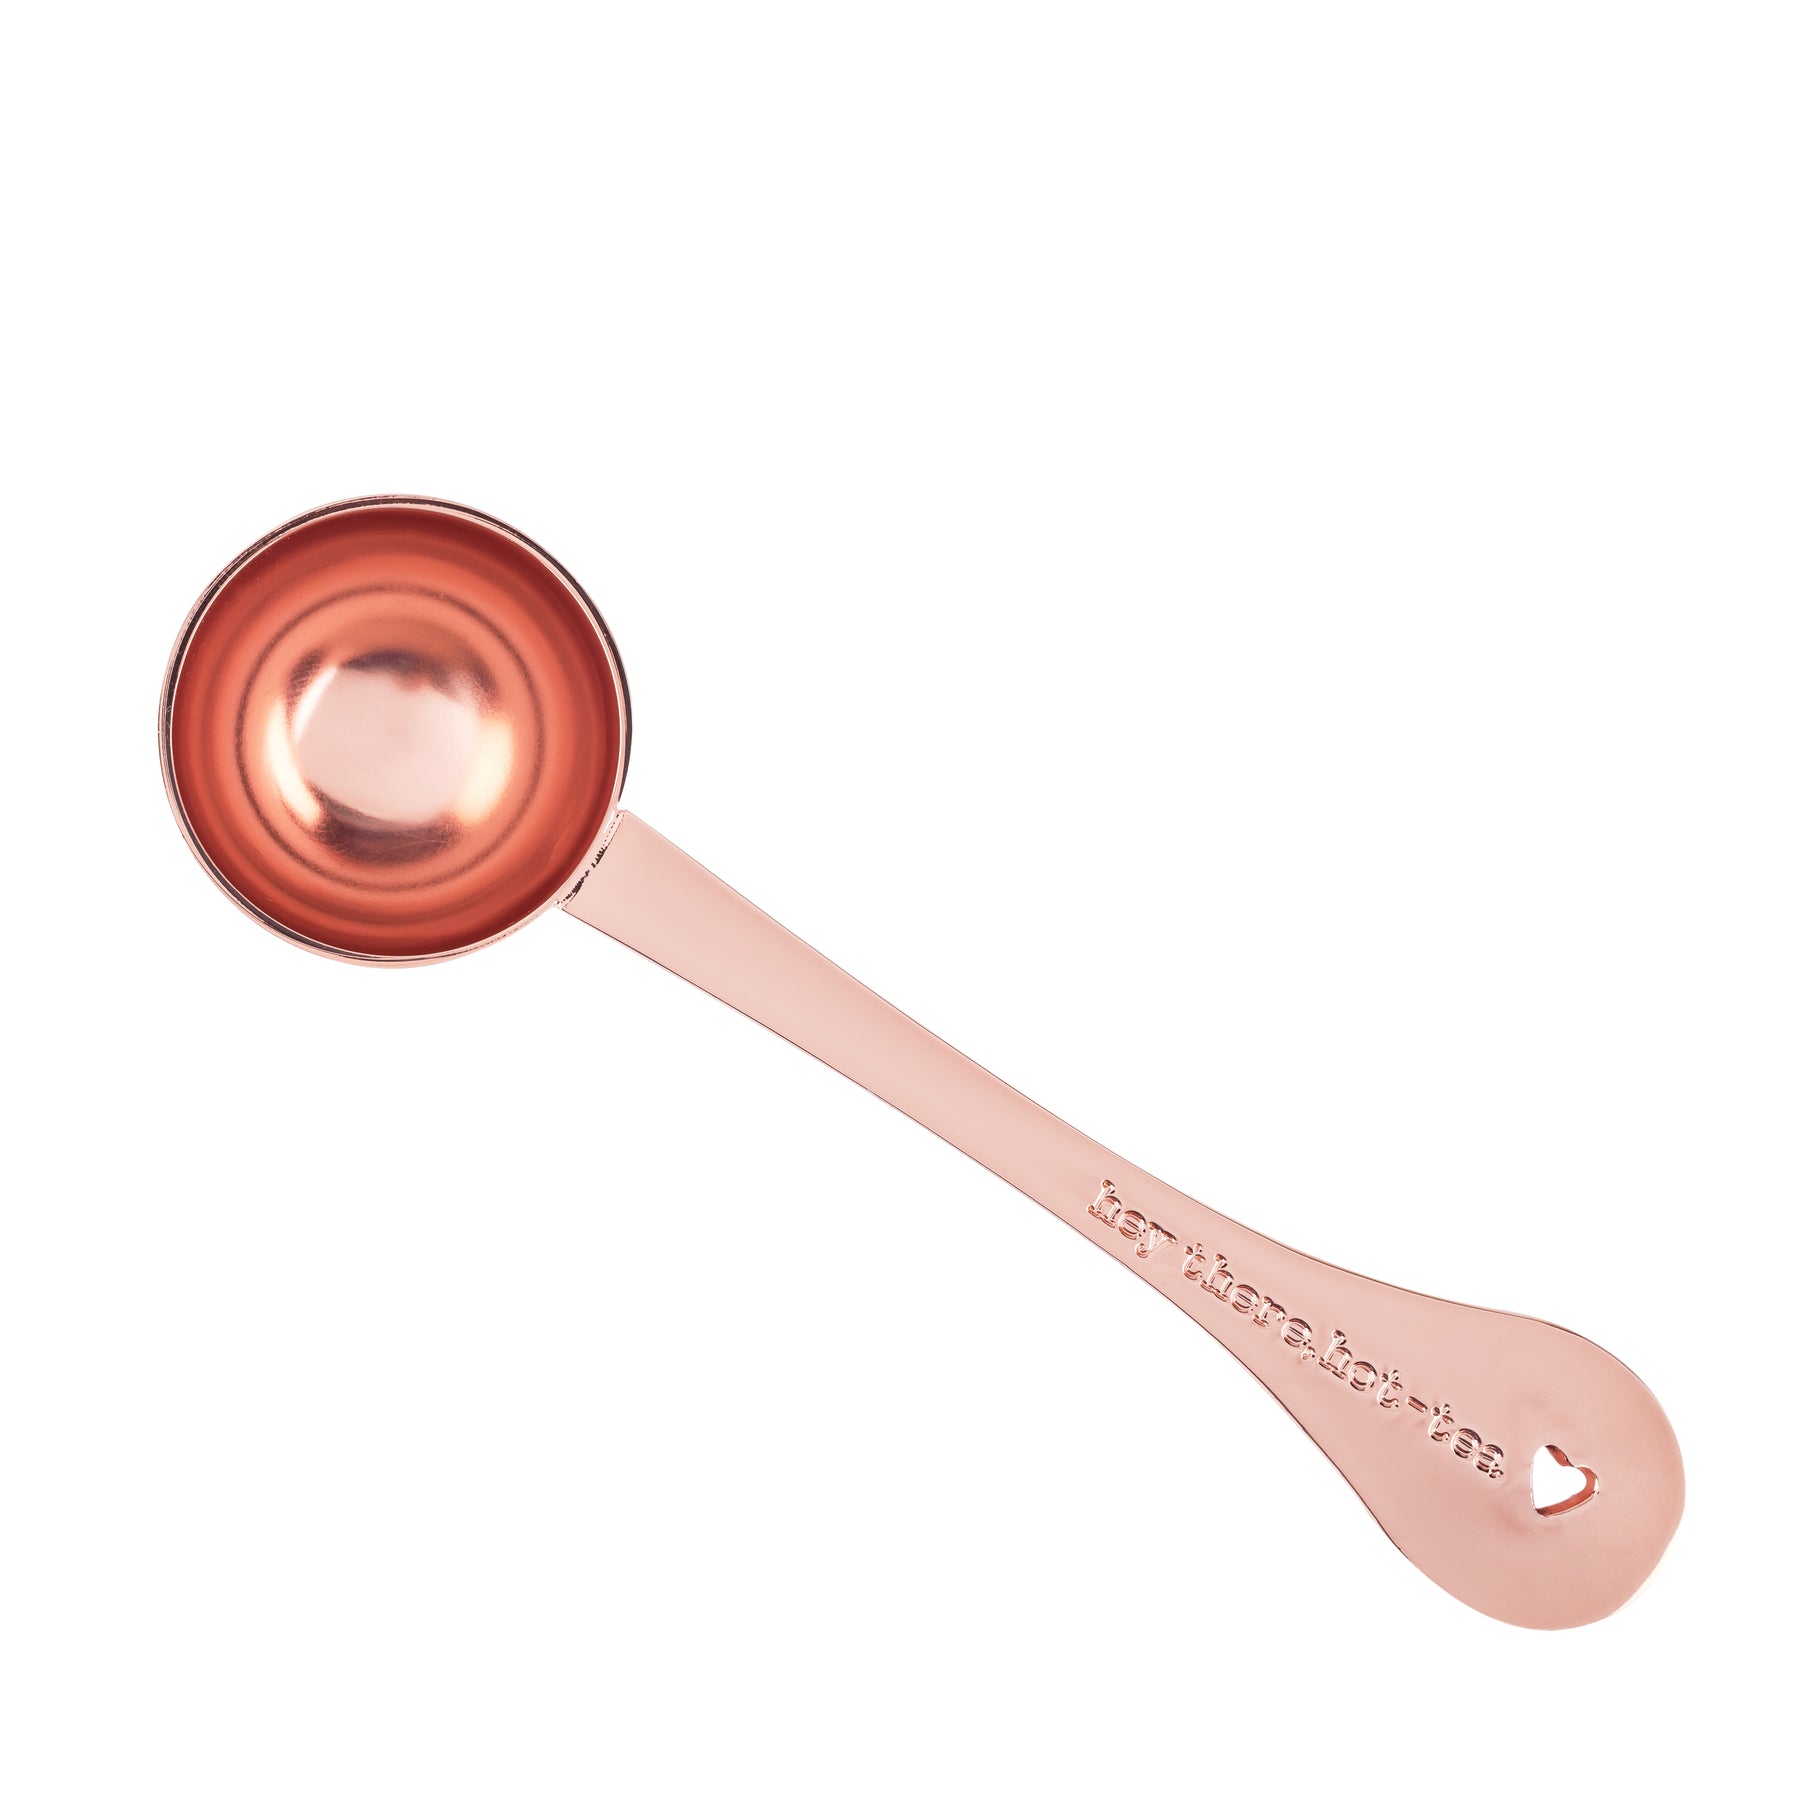 Apace Living Tea Scoop (Set of 3) - Stainless Steel Measuring Spoons for  Loose Leaf Tea, Coffee and More (L, Rose Gold)